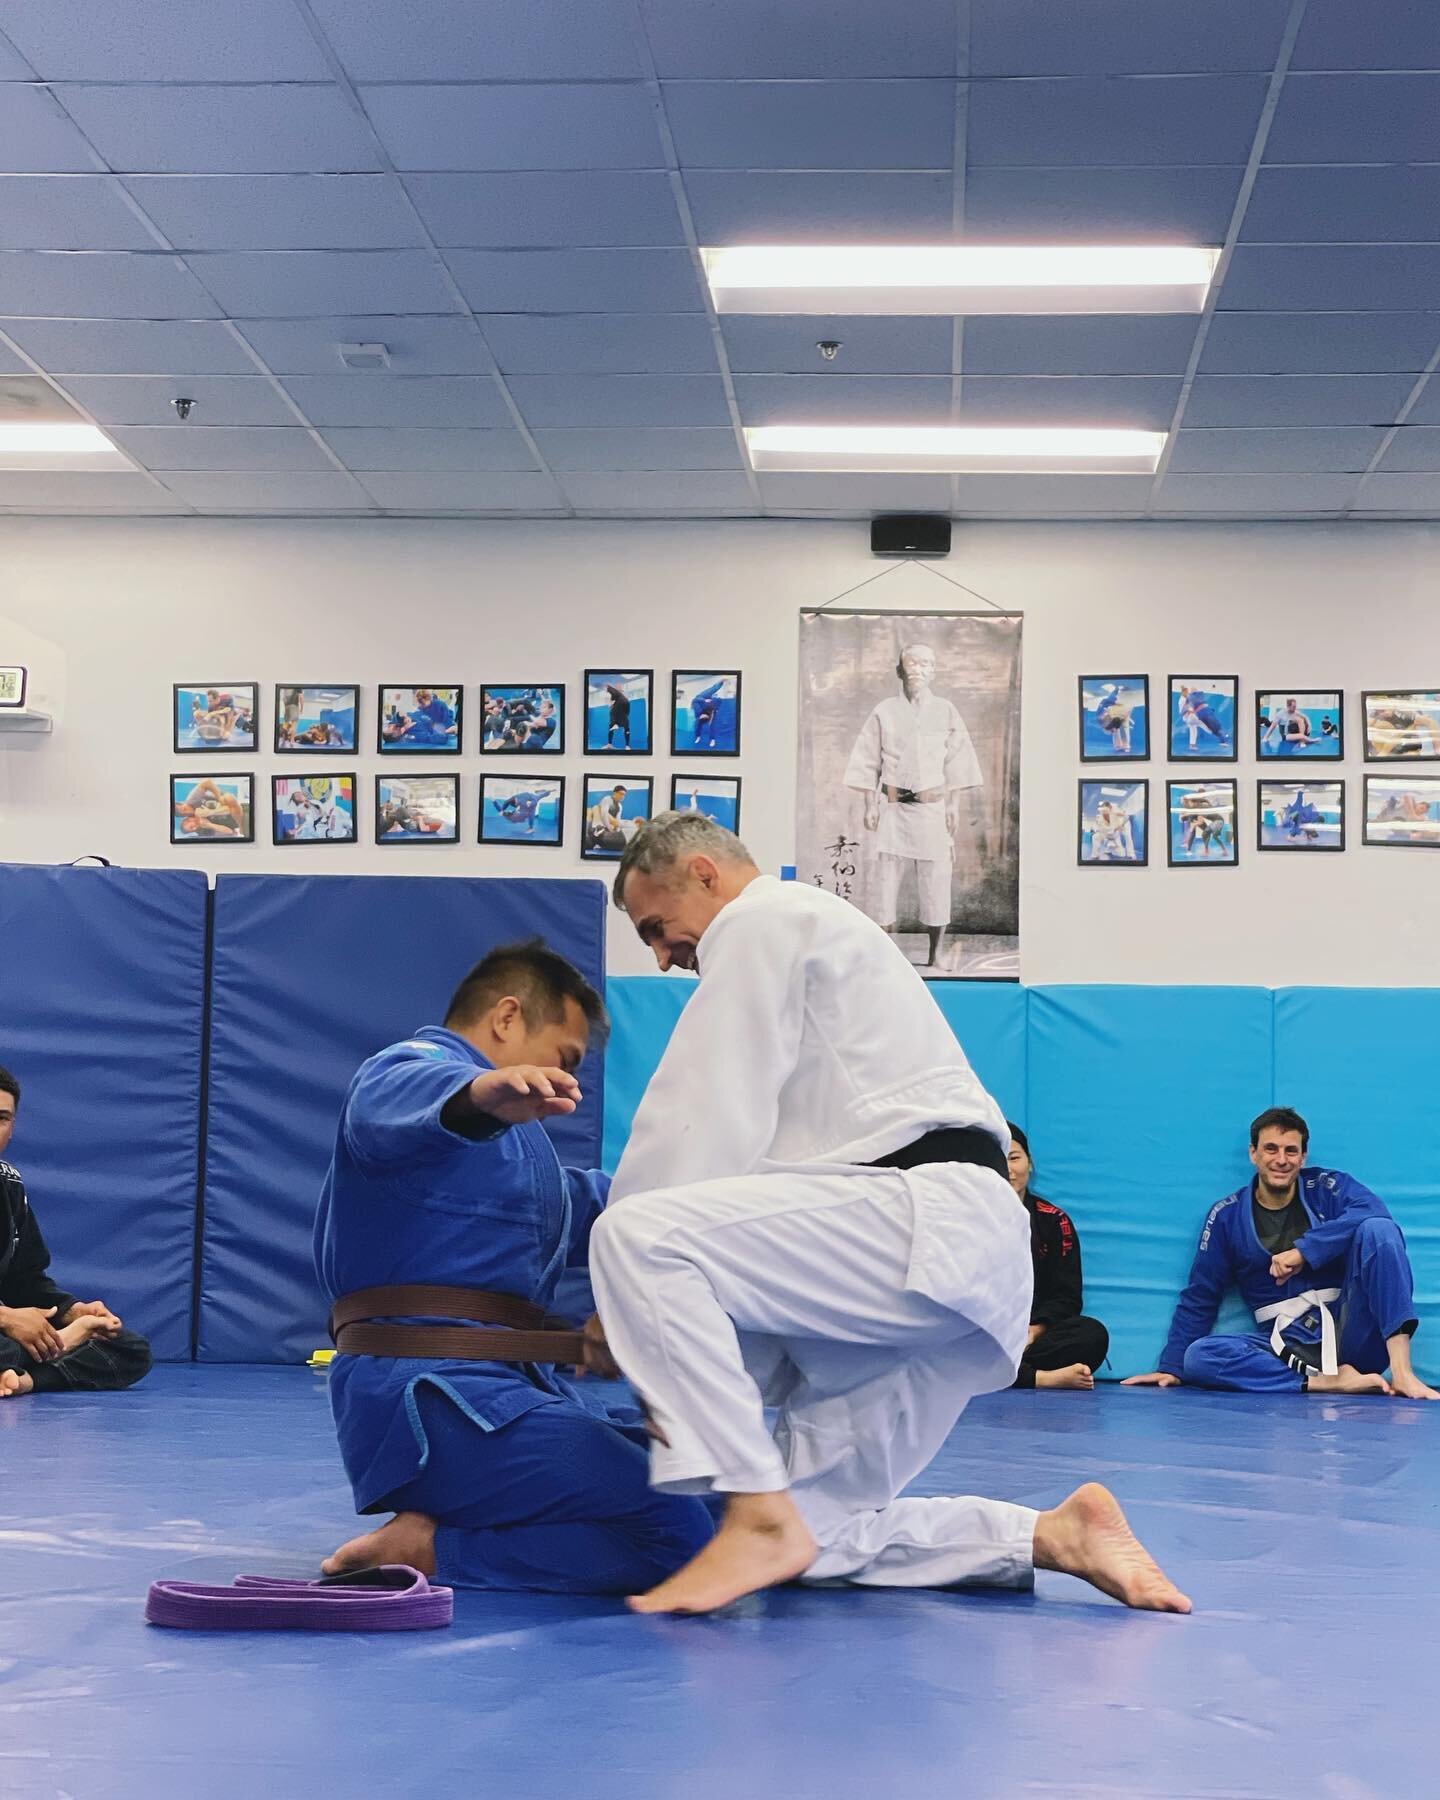 BJJ promotions: 
Johnny to brown 
Larry, Dave, and Bess to blue
Murad and Dylan to orange